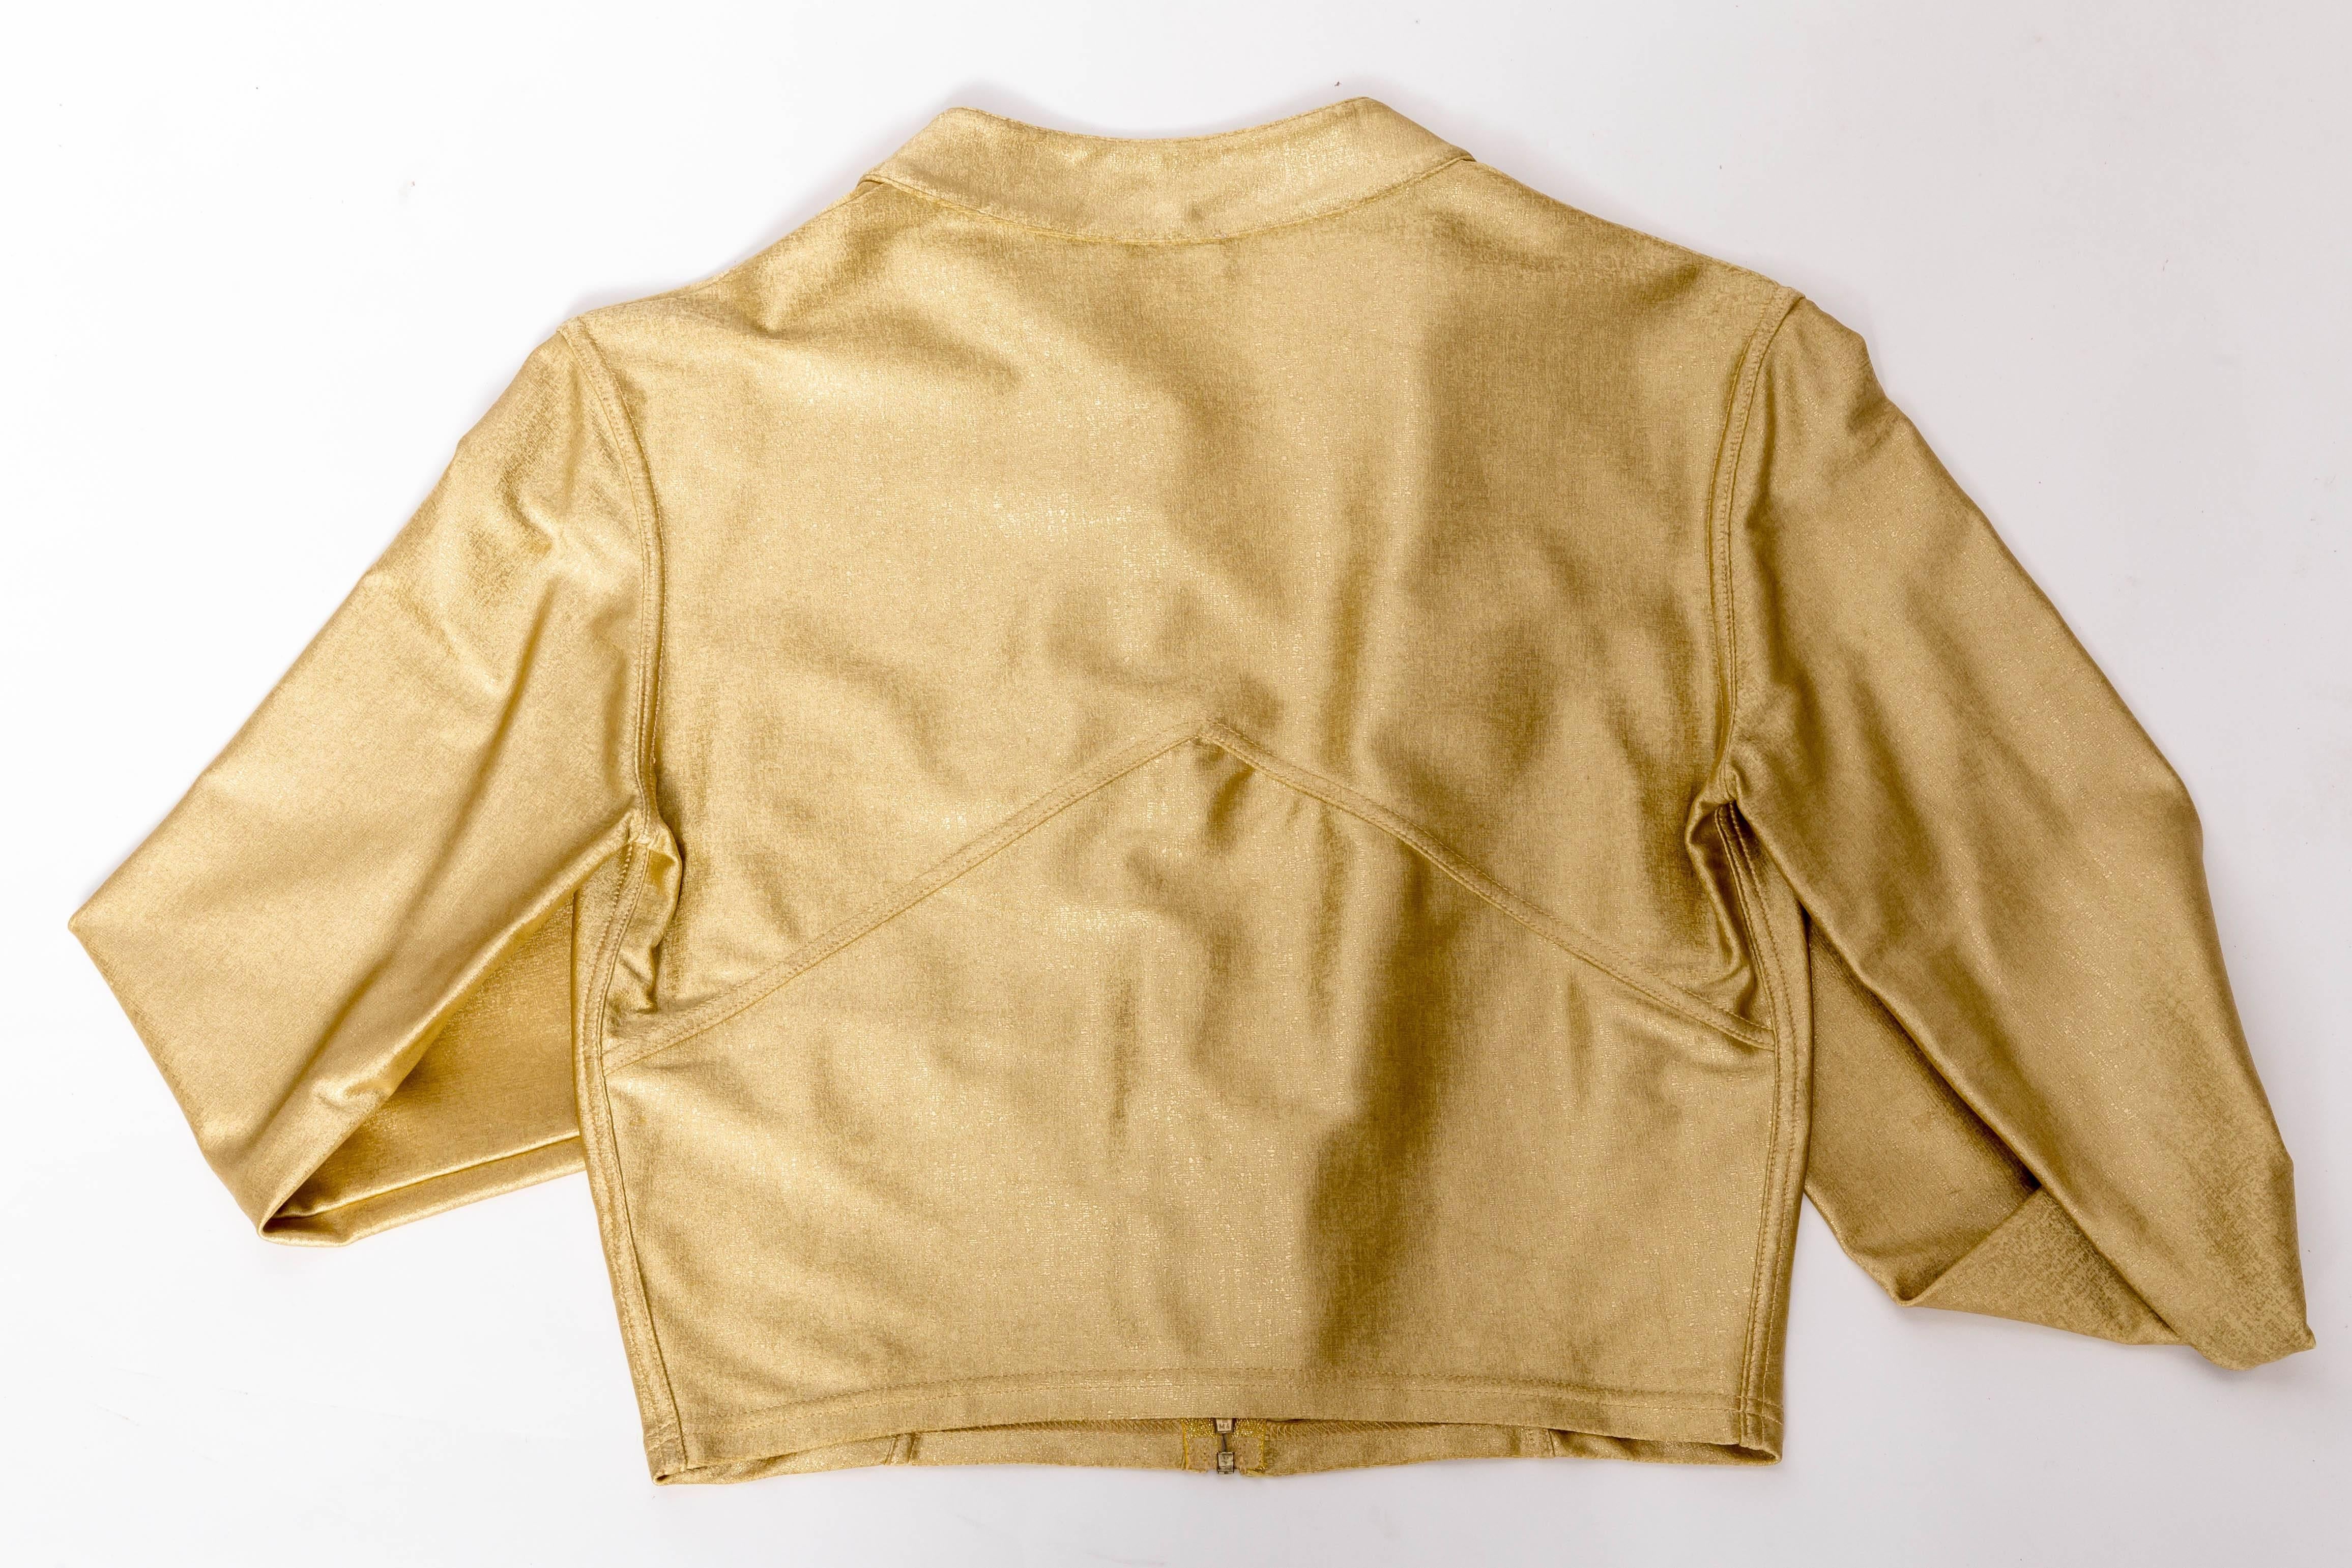 Women's Vintage Chanel Gold Cropped Zip Top - Size 38